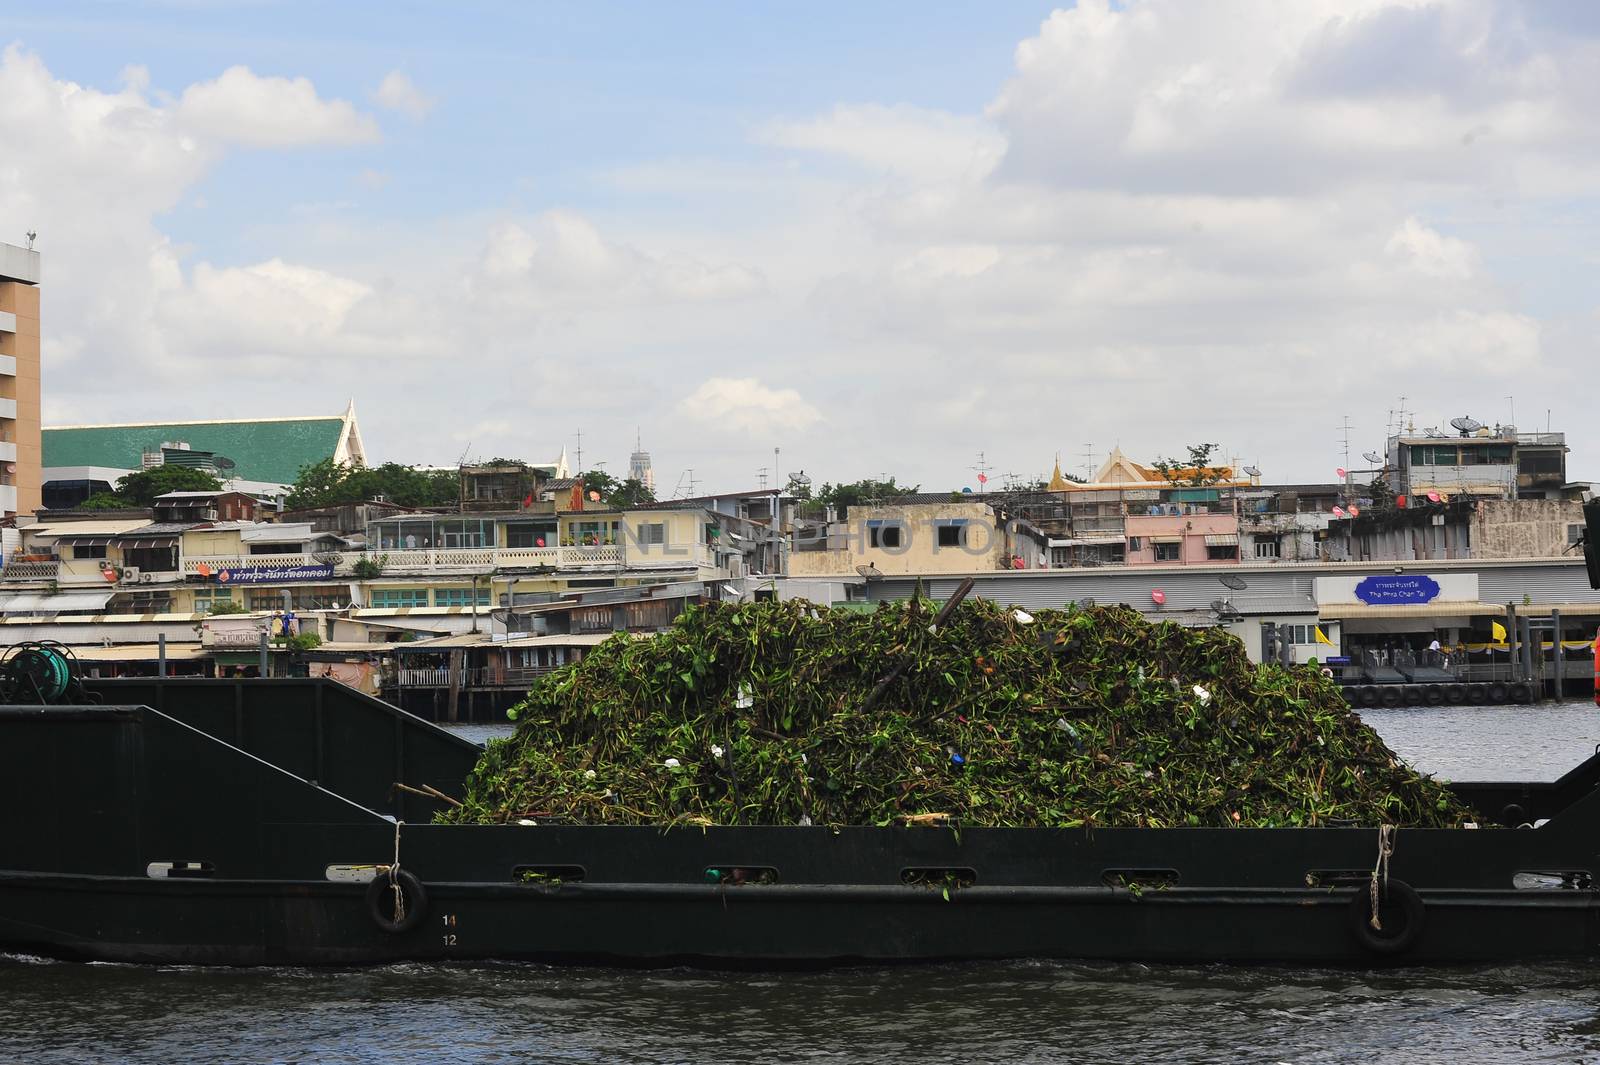 BANGKOK, THAILAND –  21 OCTOBER 2019 : The Canal System Division  Department of Drainage & Sewerage boat  are collecting waste and Aquatic Weed  in  Chao Phraya River